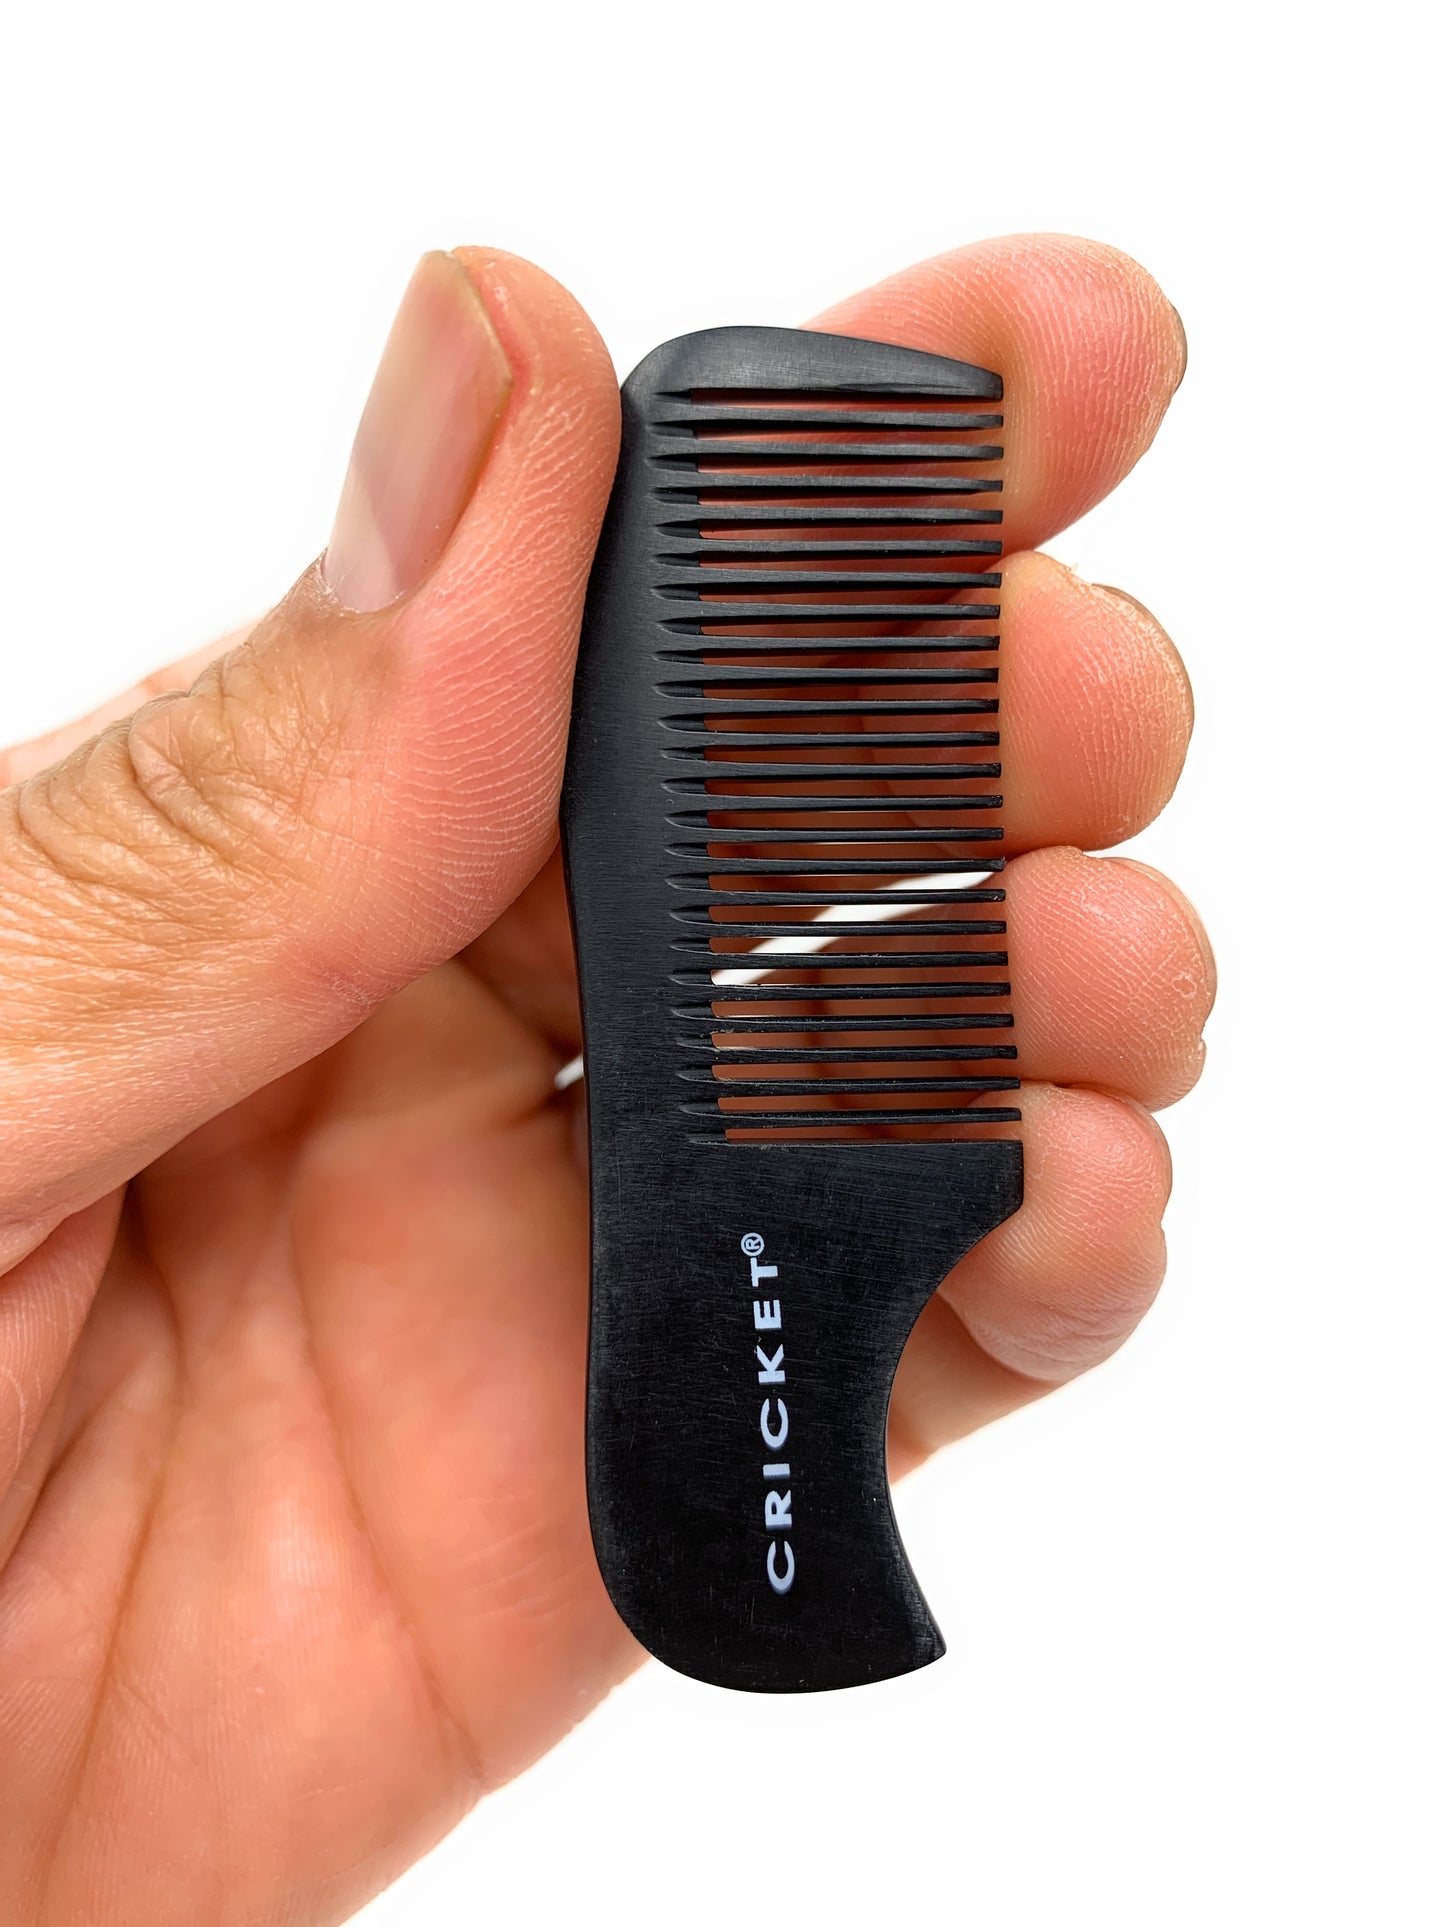 Cricket Don't Trash The Stache Grooming Kit Grooming Shears Tweezers And Beard Comb 3 Pcs.